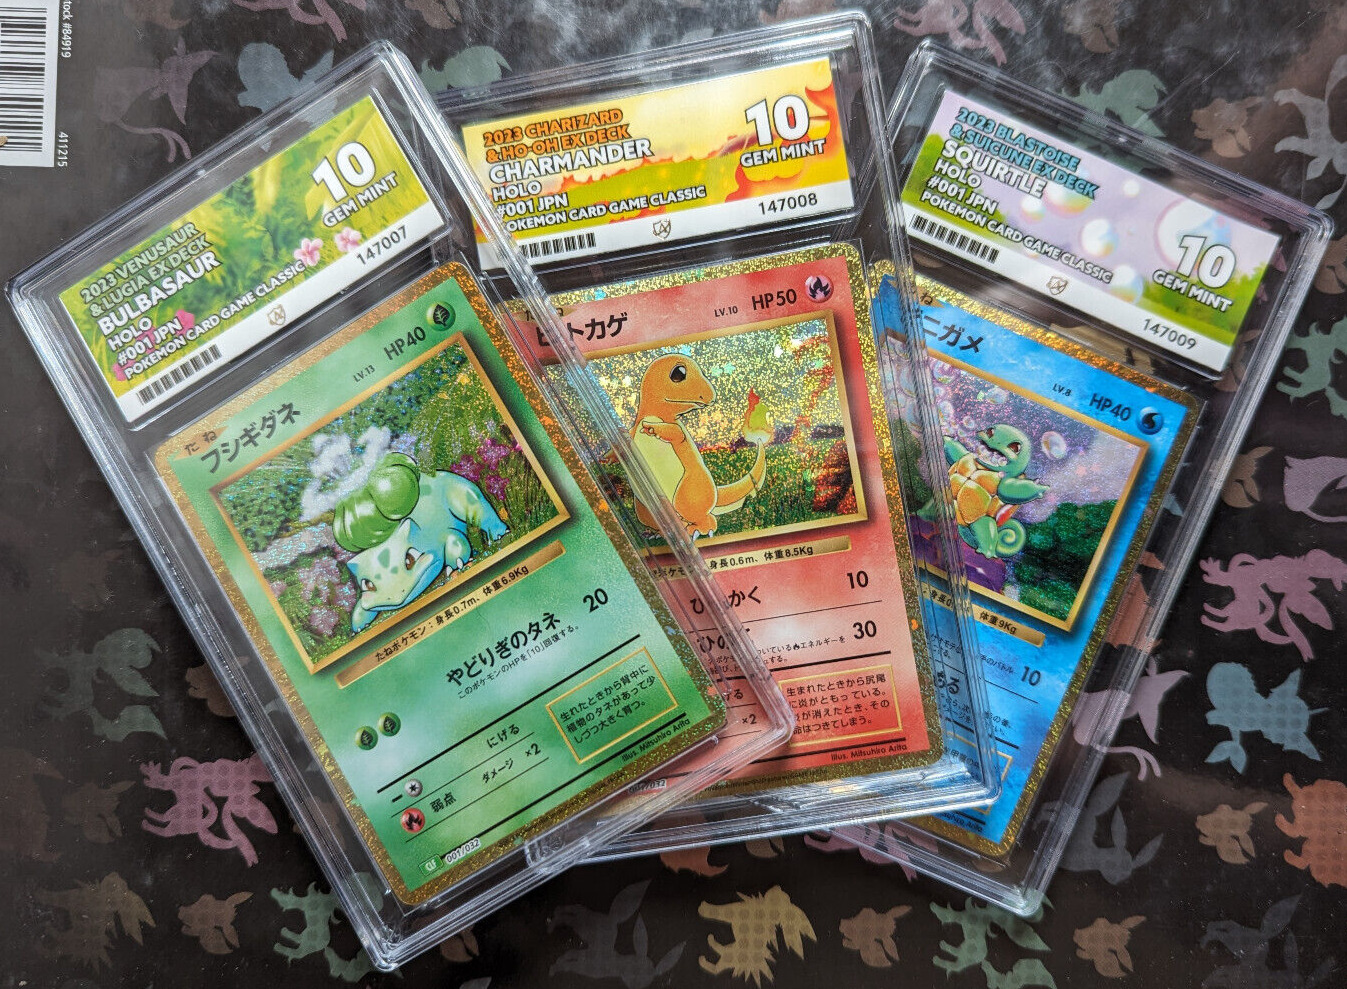 Bulbasaur + Charmander + Squirtle 001/032 Pokemon Classic Ace 10 SEQUENTIAL